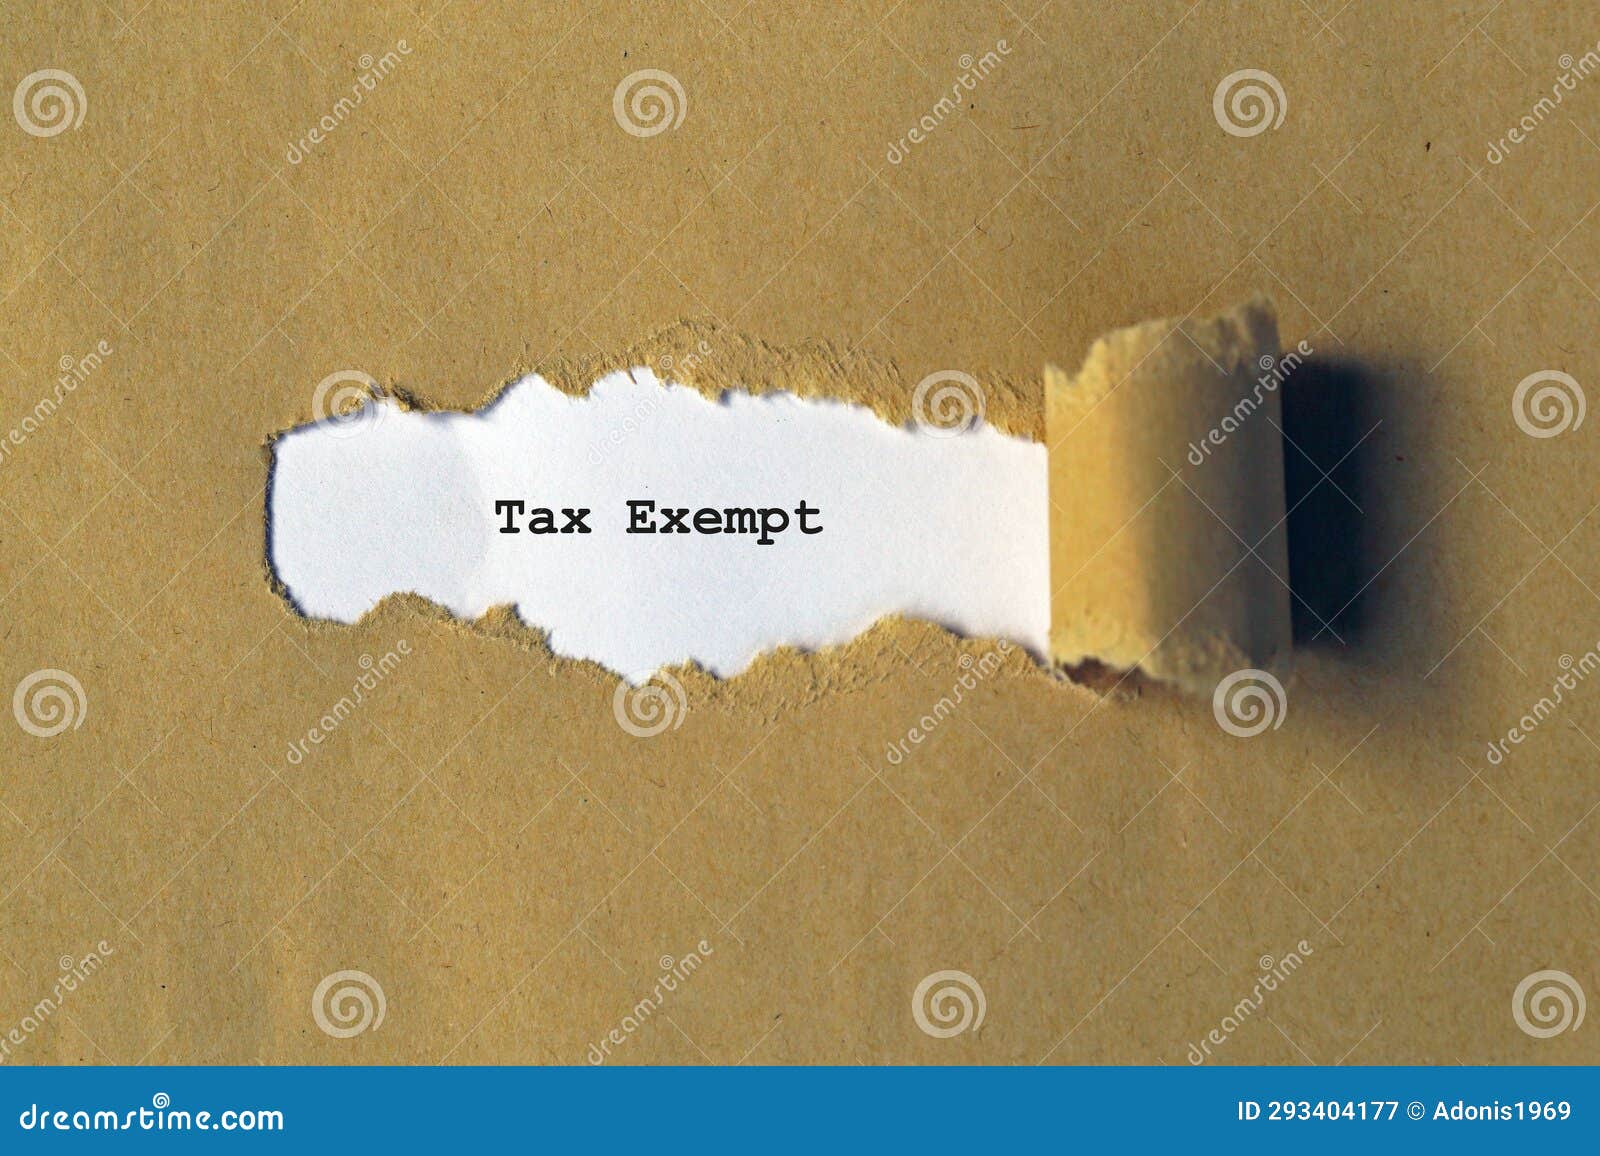 tax exempt on white paper